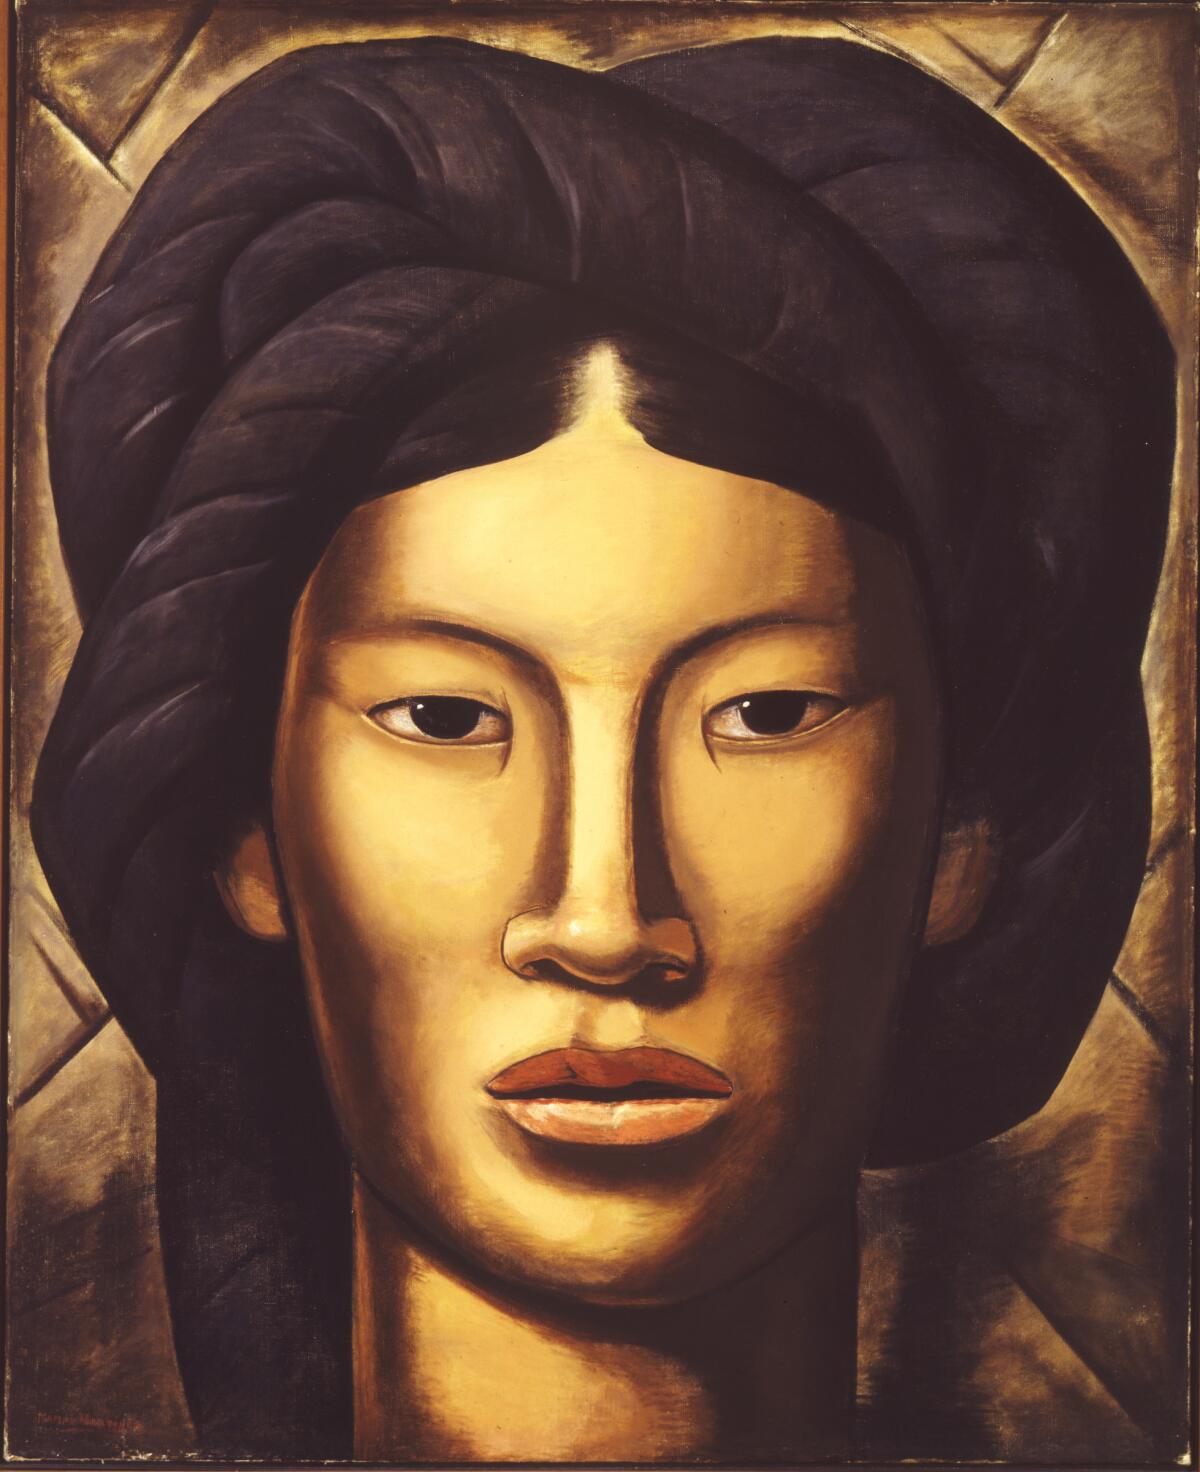 A painting shows an Indigenous woman's face framed in warm shades of brown.